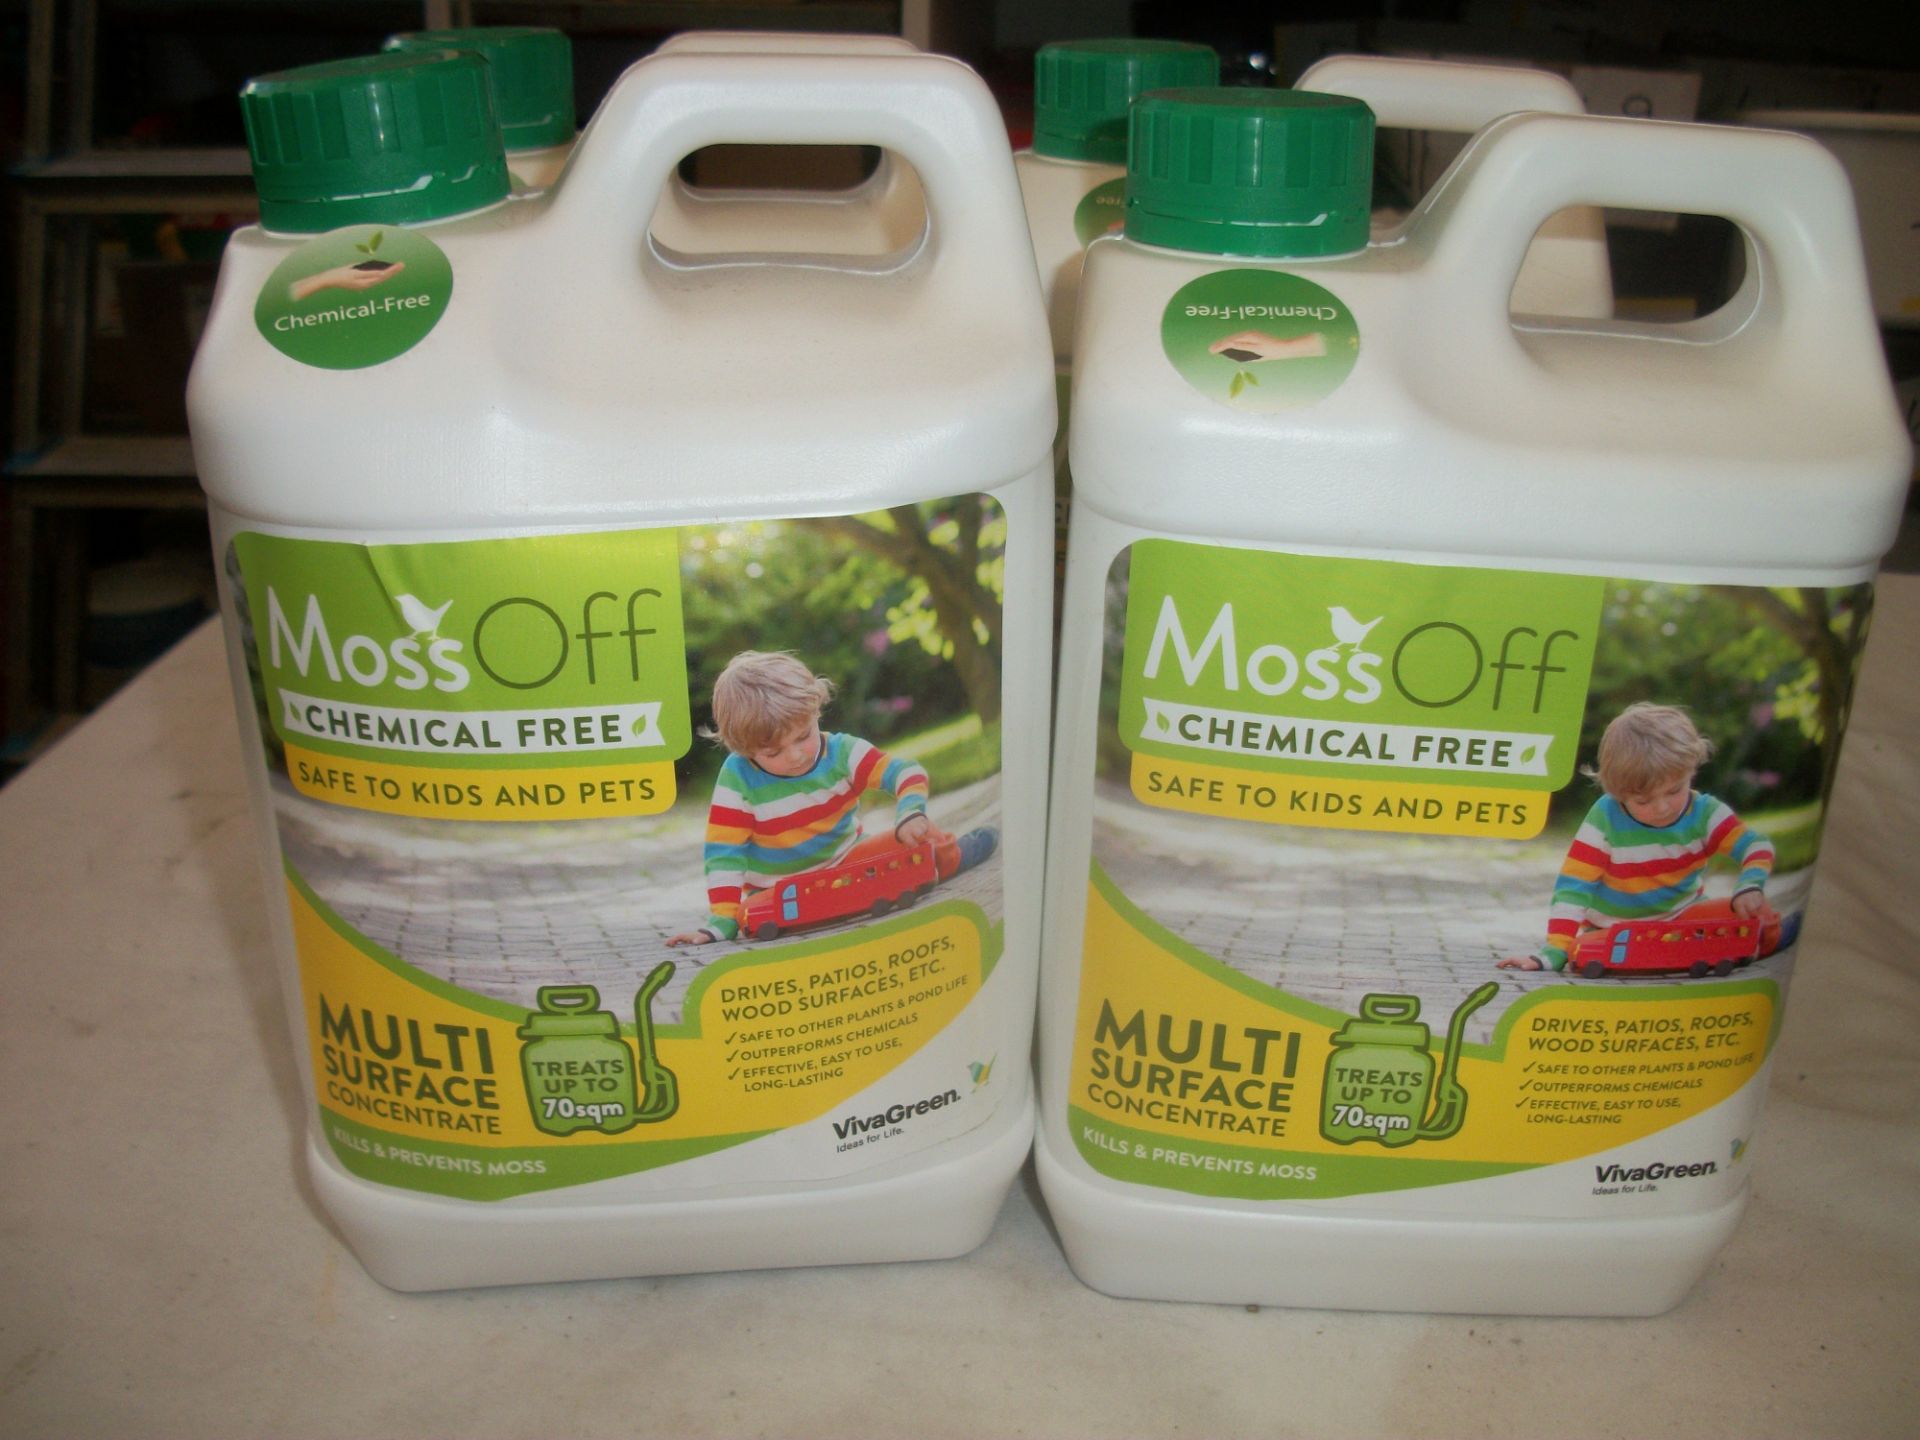 4 x Moss Off Multi Surface Concentrate 2ltr each